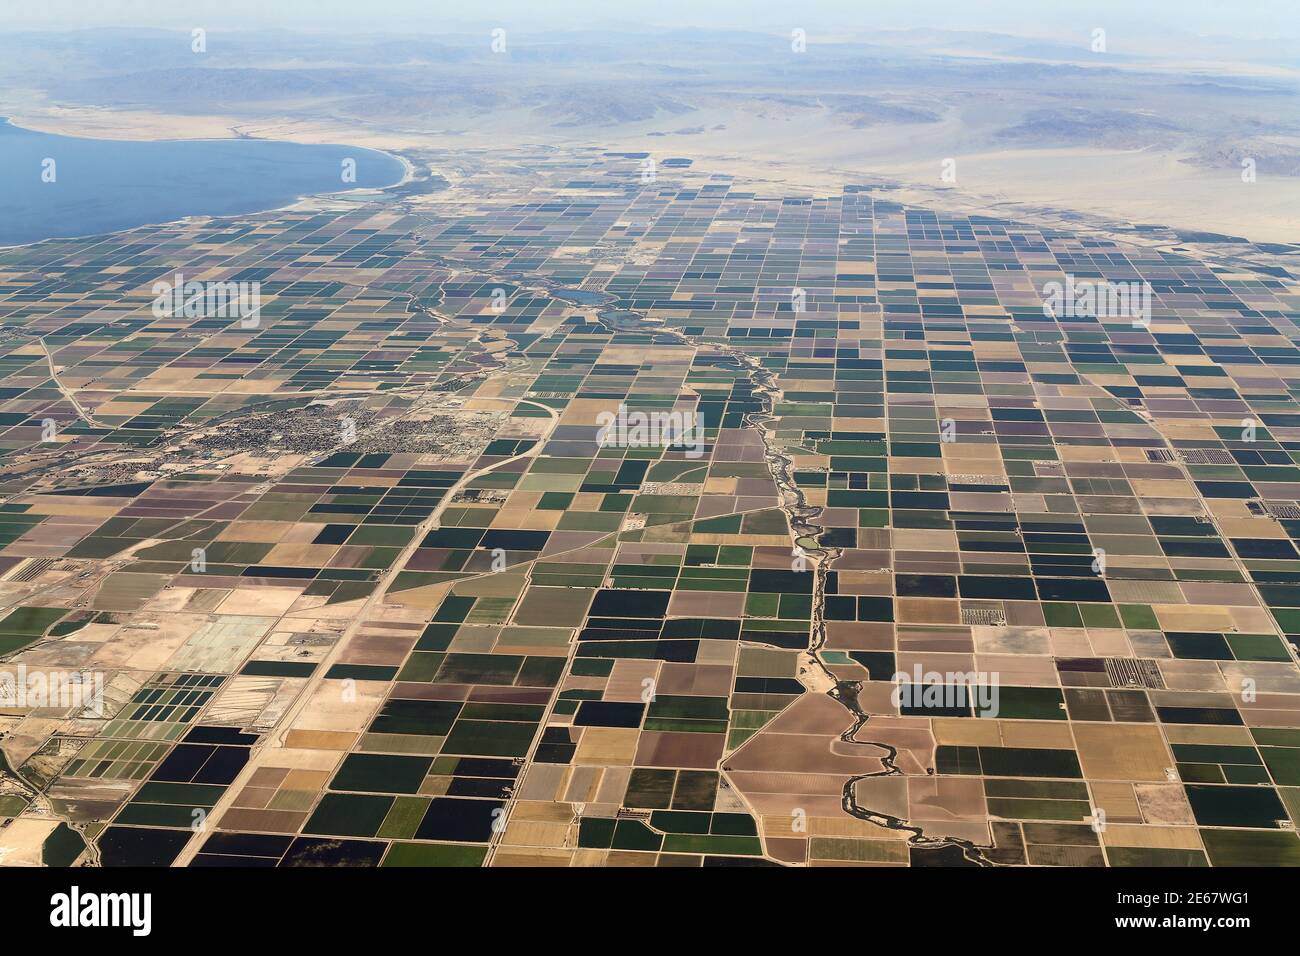 Agricultural farm land is shown surrounding the town of Calipatria in California May 31, 2015. California is enduring its worst drought on record.  REUTERS/Mike Blake Stock Photo